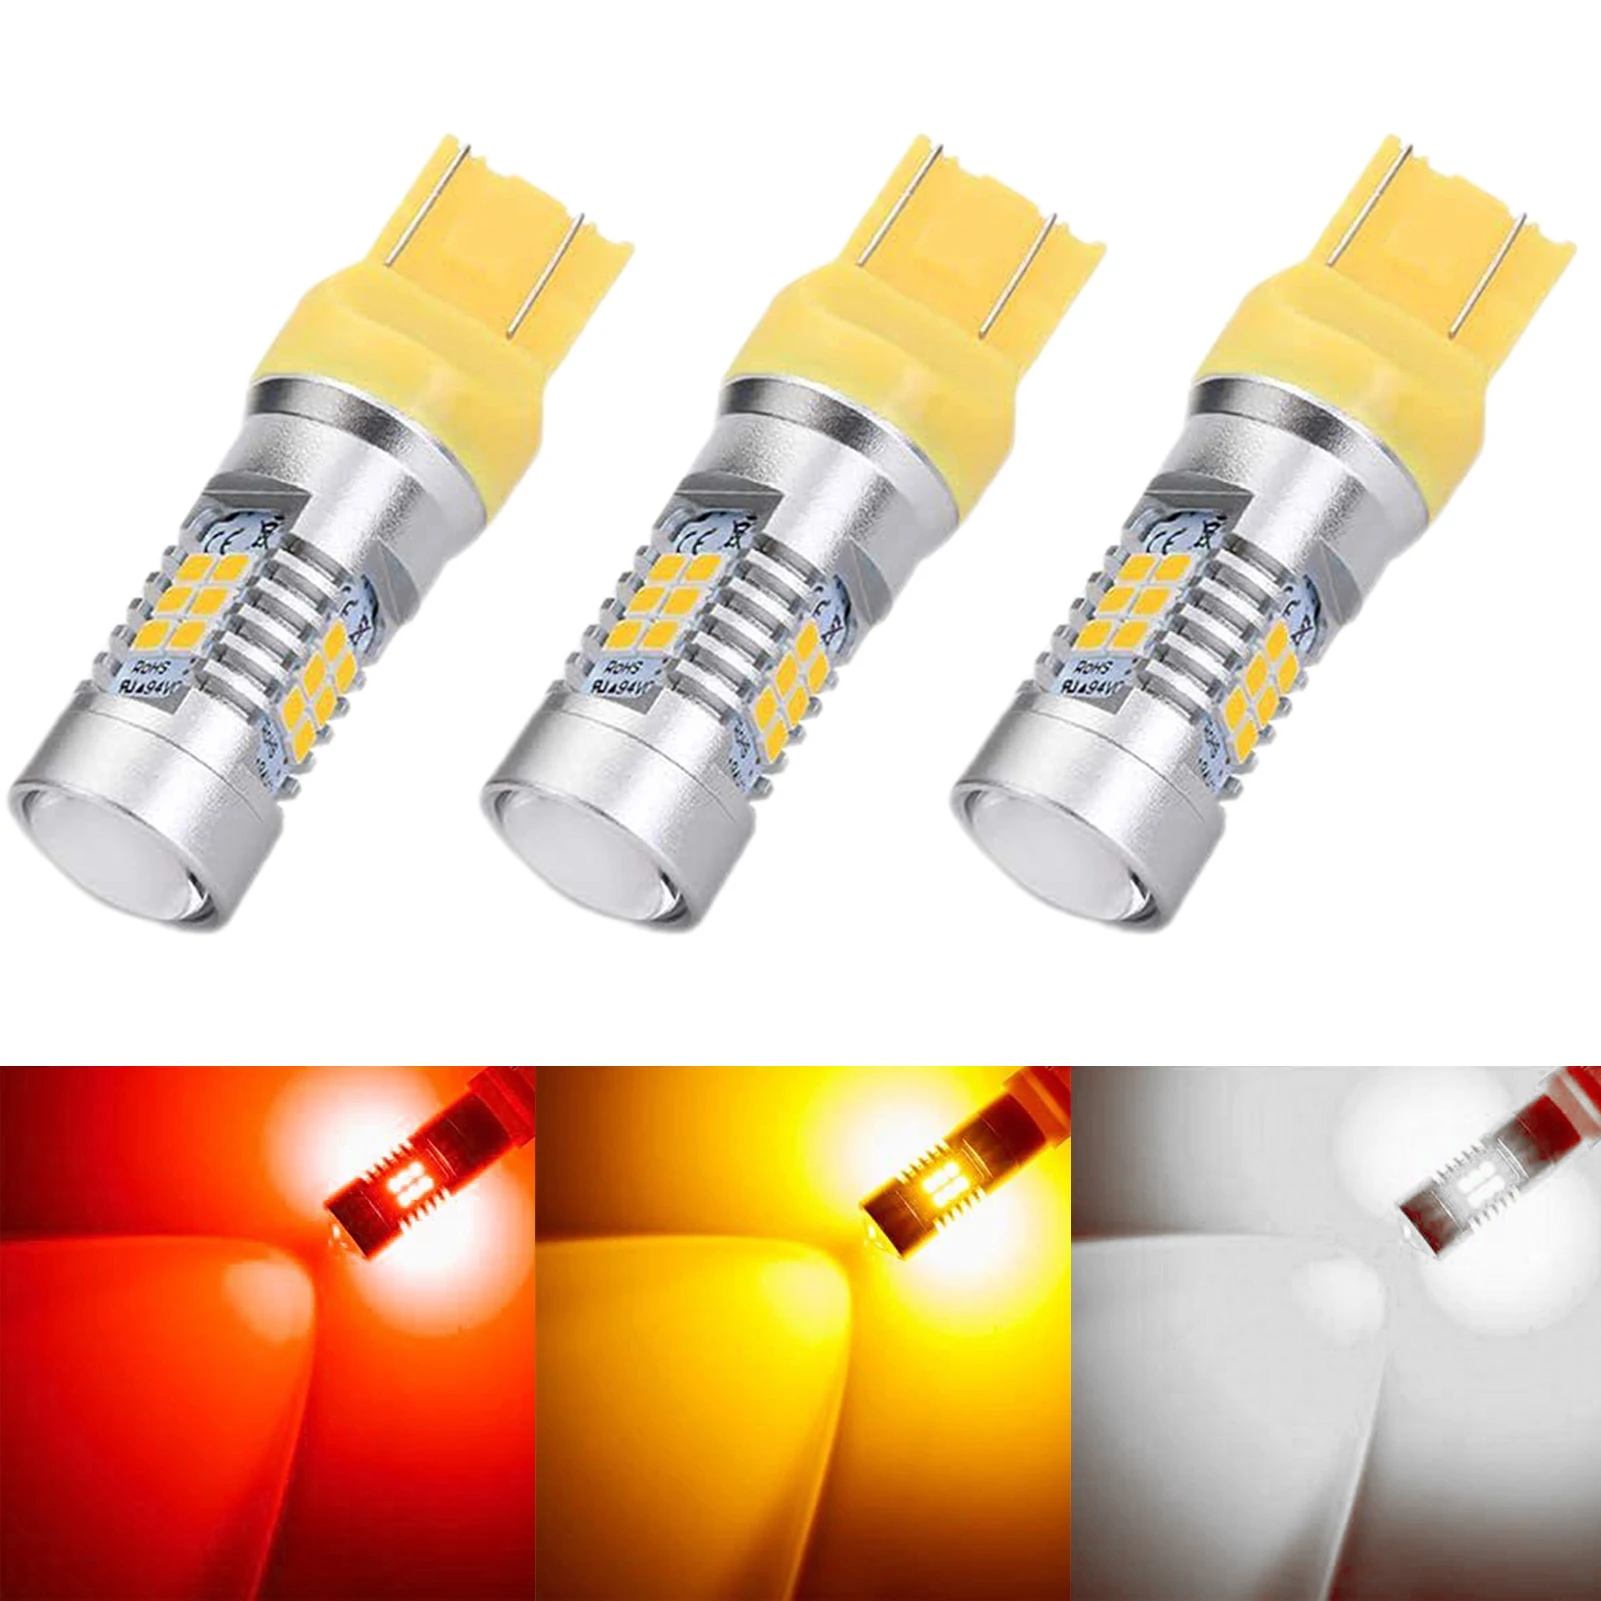 

T20 7440 7443 LED Bulb High Power Car Turn Signal Lights Bulbs 21W High Power 2835 Chips Extremely Bright Replace For Back Up